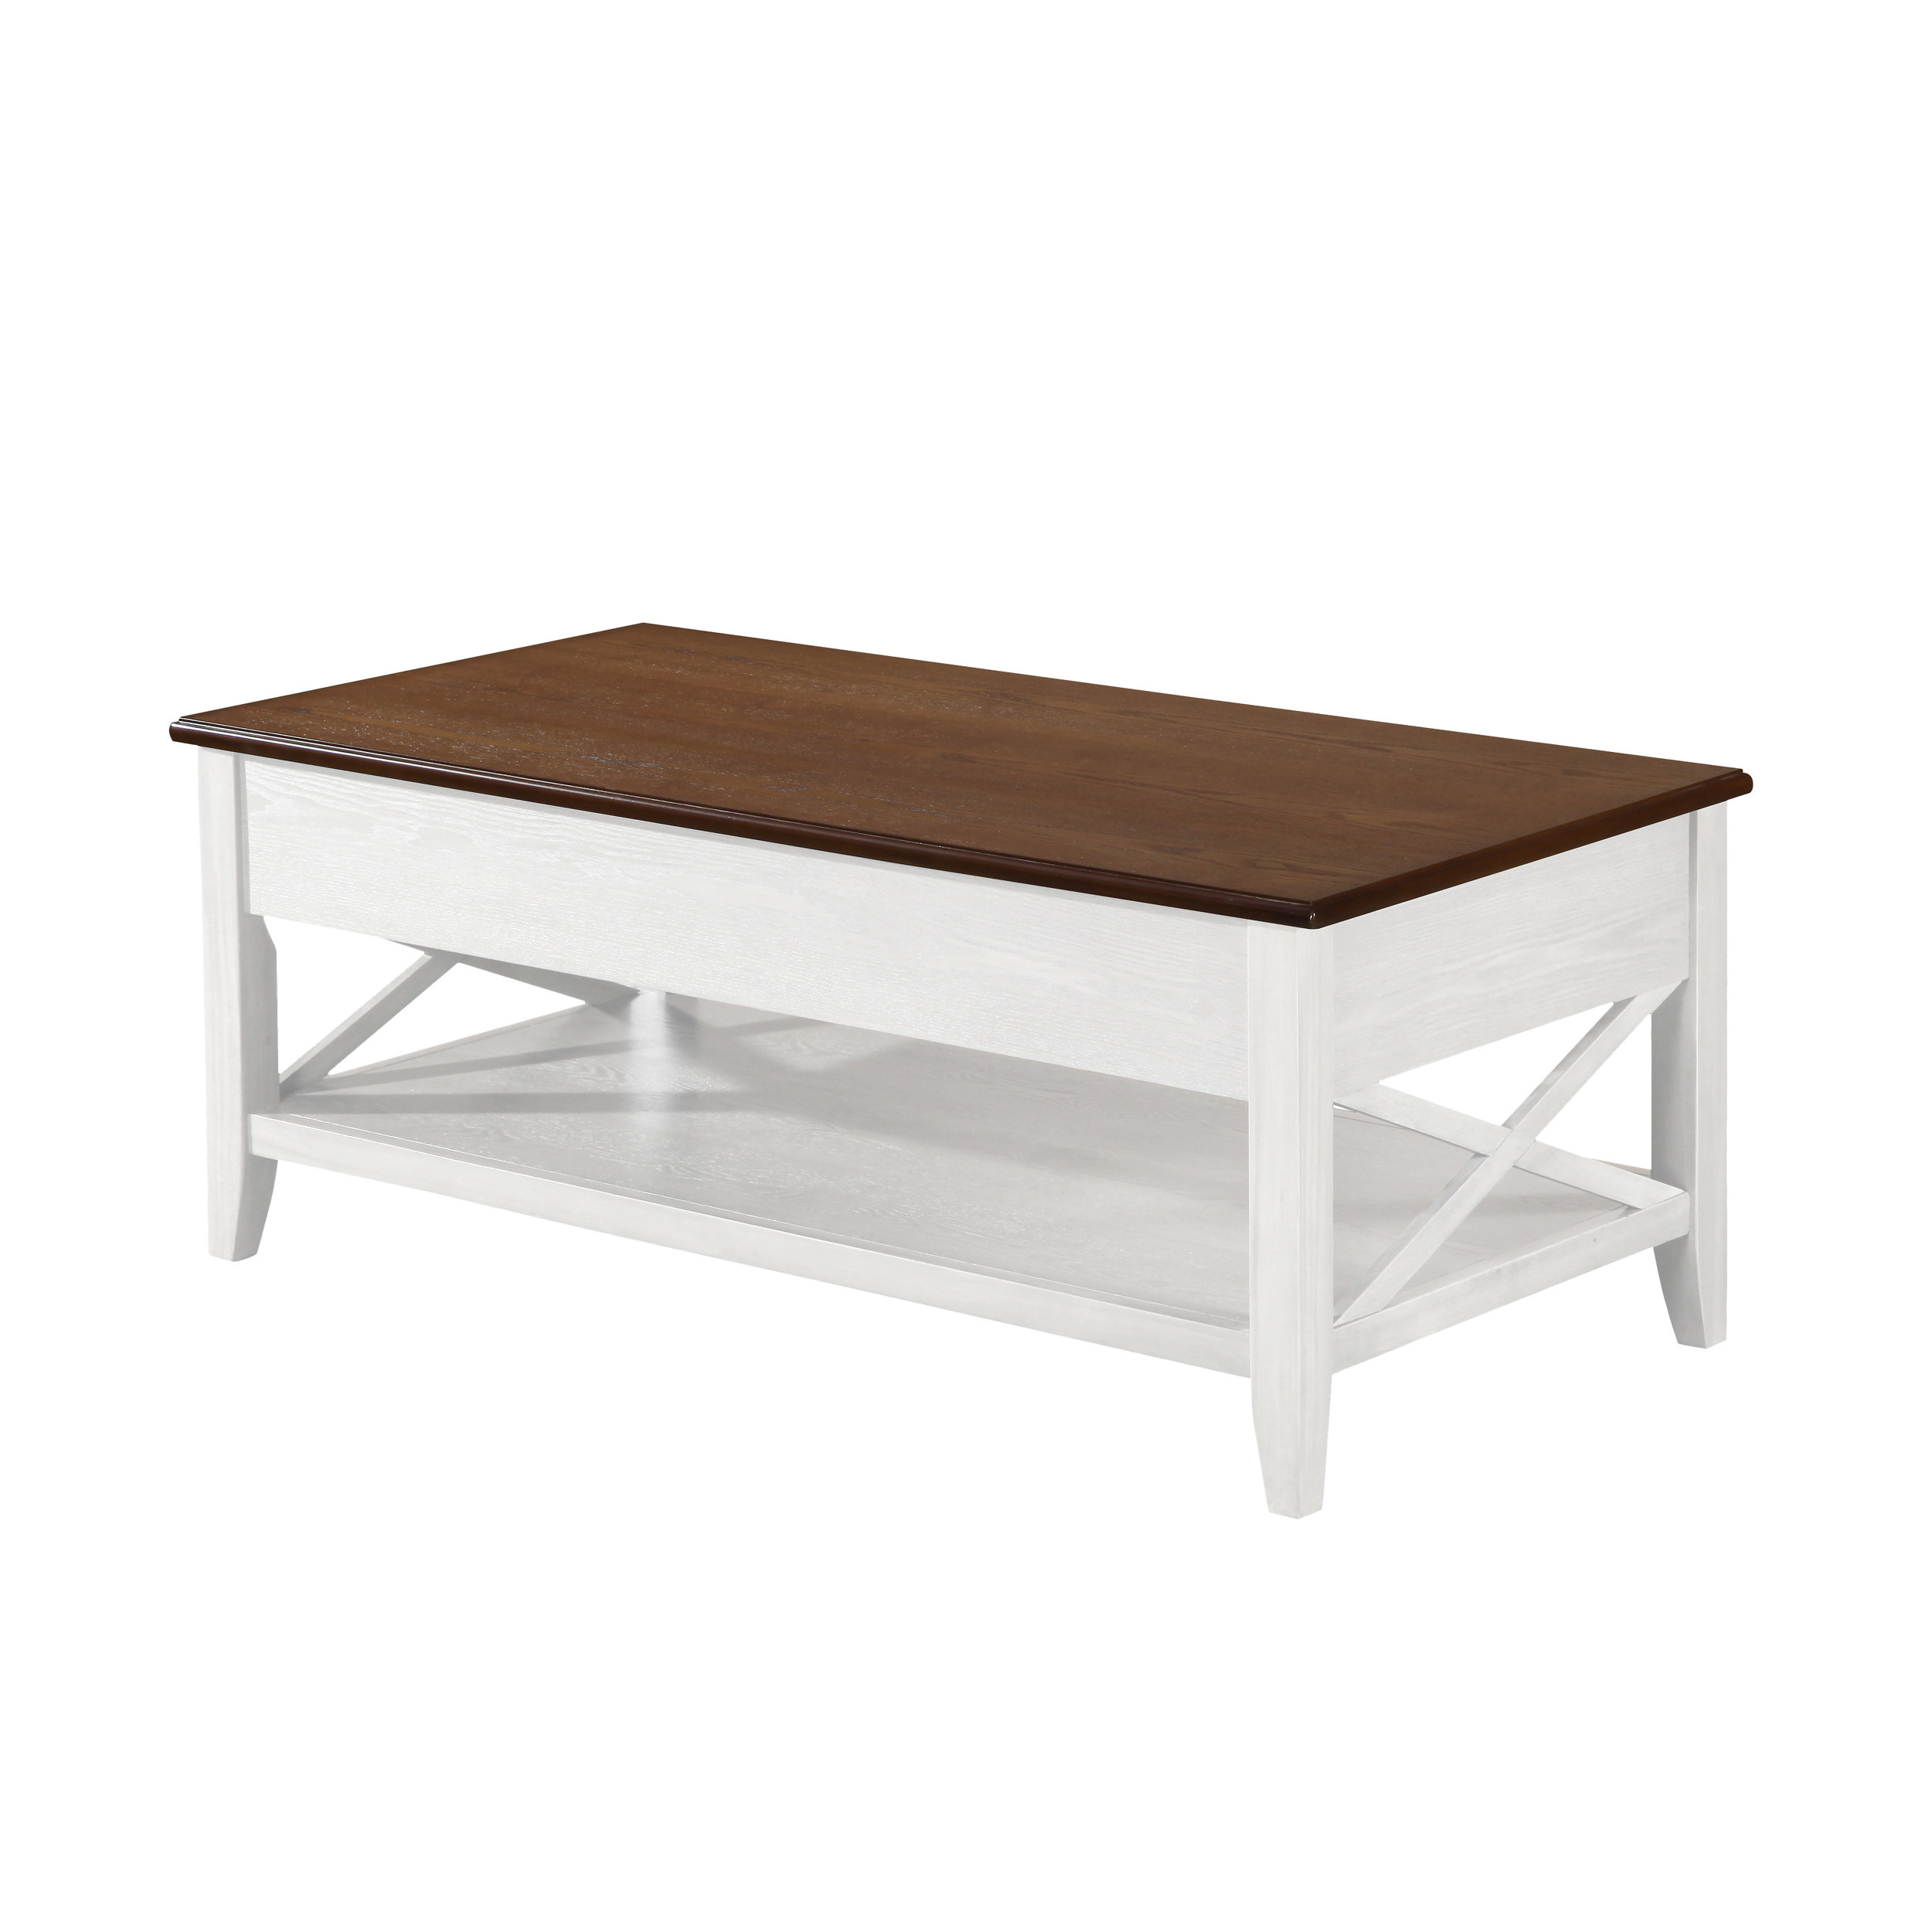 Wayfair Pine Coffee Tables You Ll Love In 2021